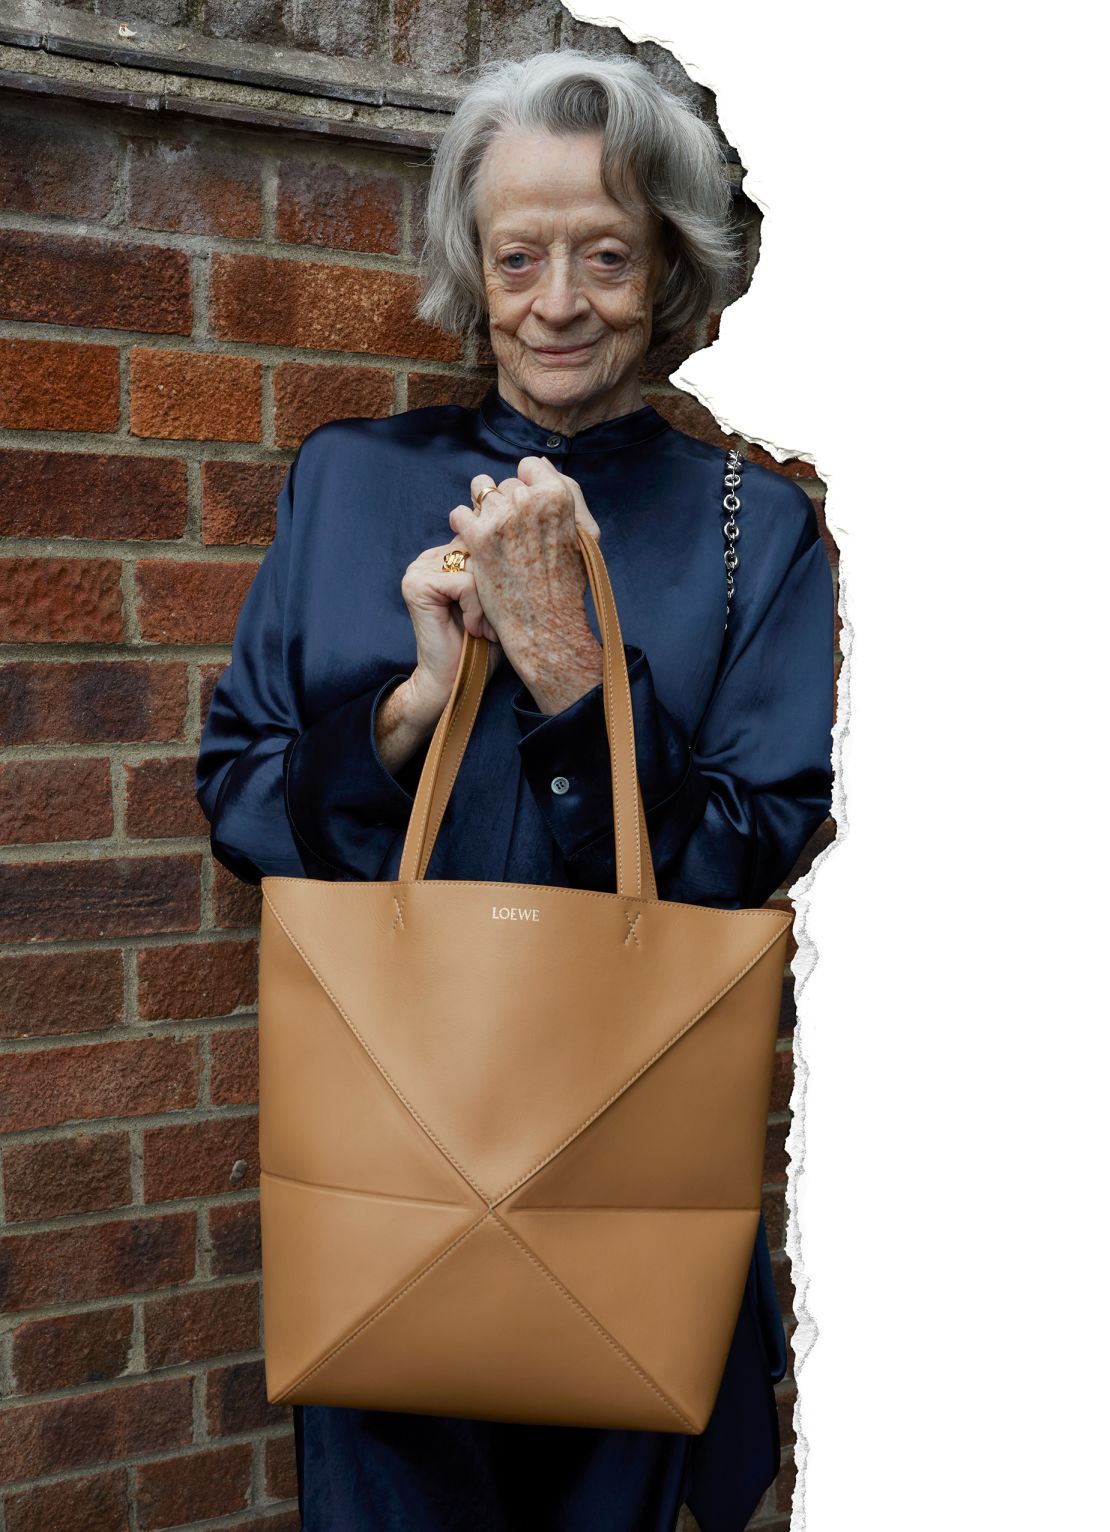 Maggie Smith has swapped the stage and screen for modeling in this latest campaign.